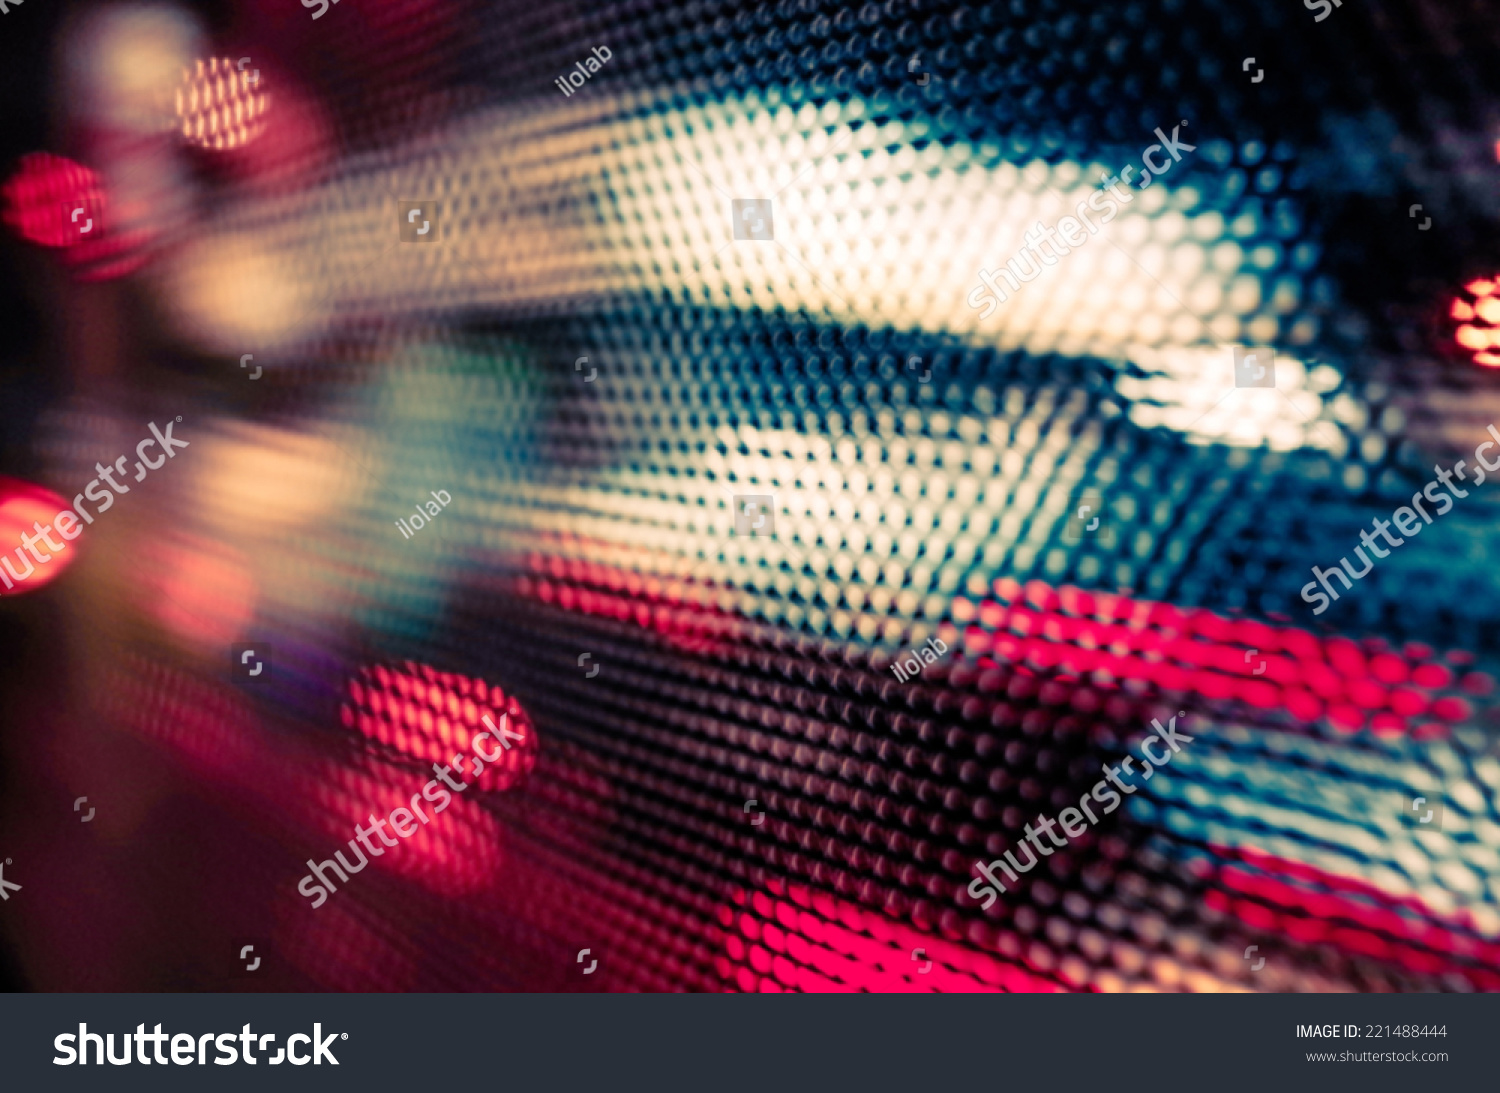 abstract background with bokeh defocused lights and shadow  #221488444